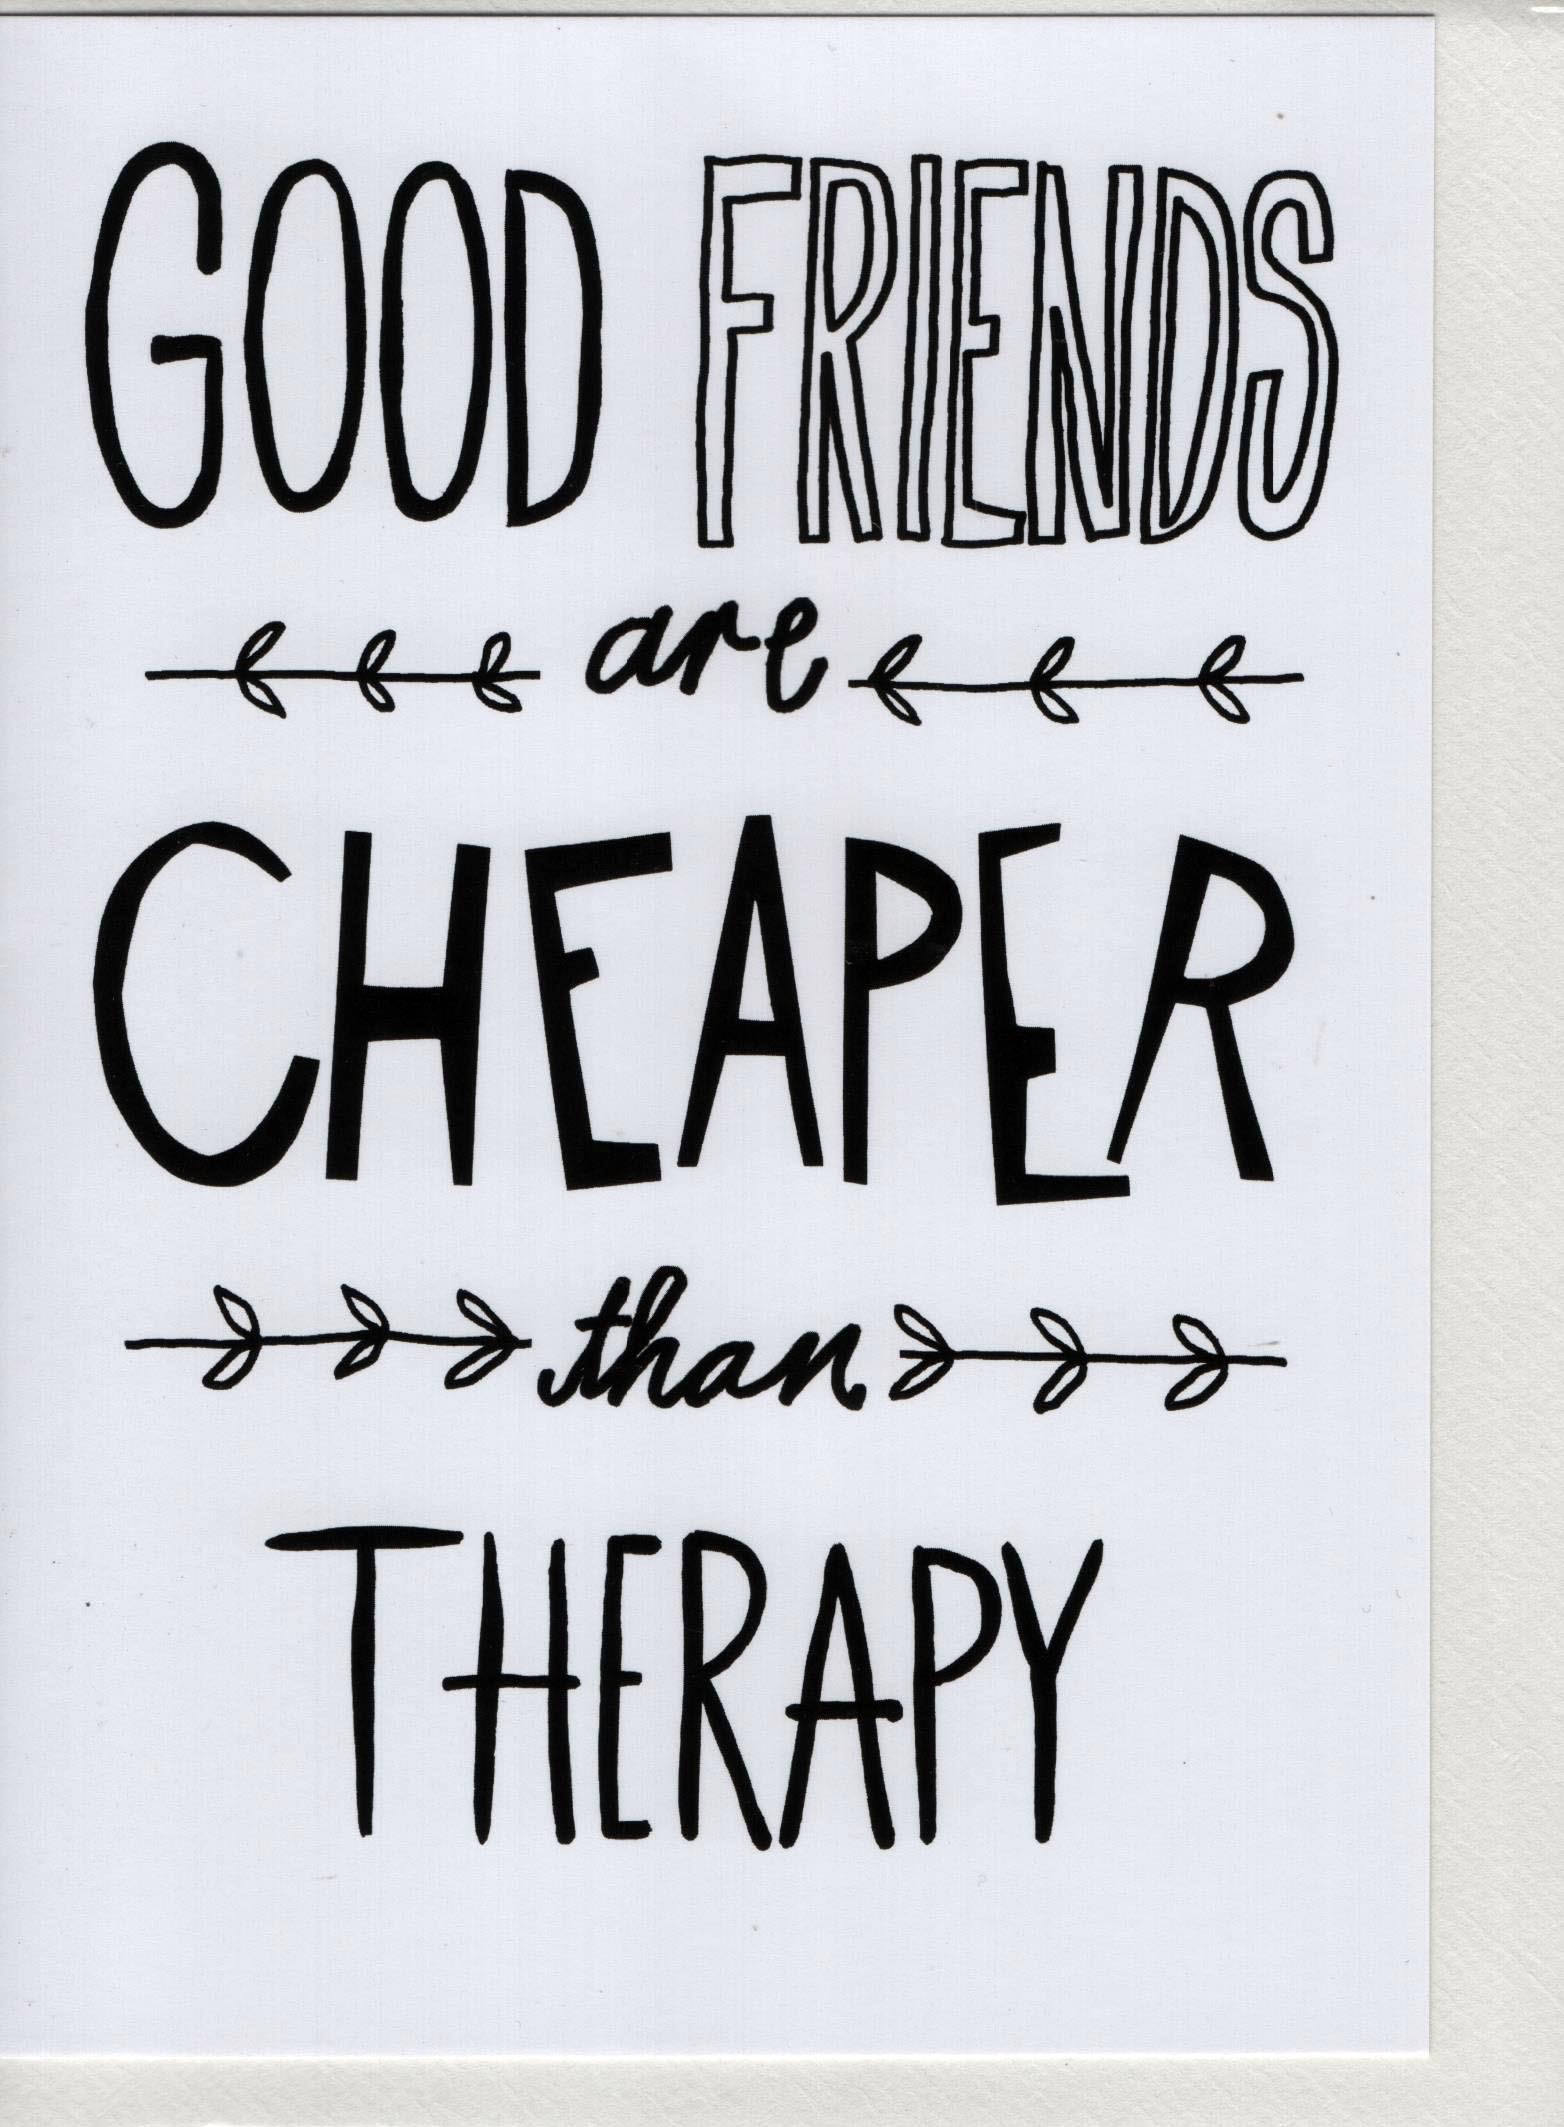 Good Friends are Cheaper than Therapy